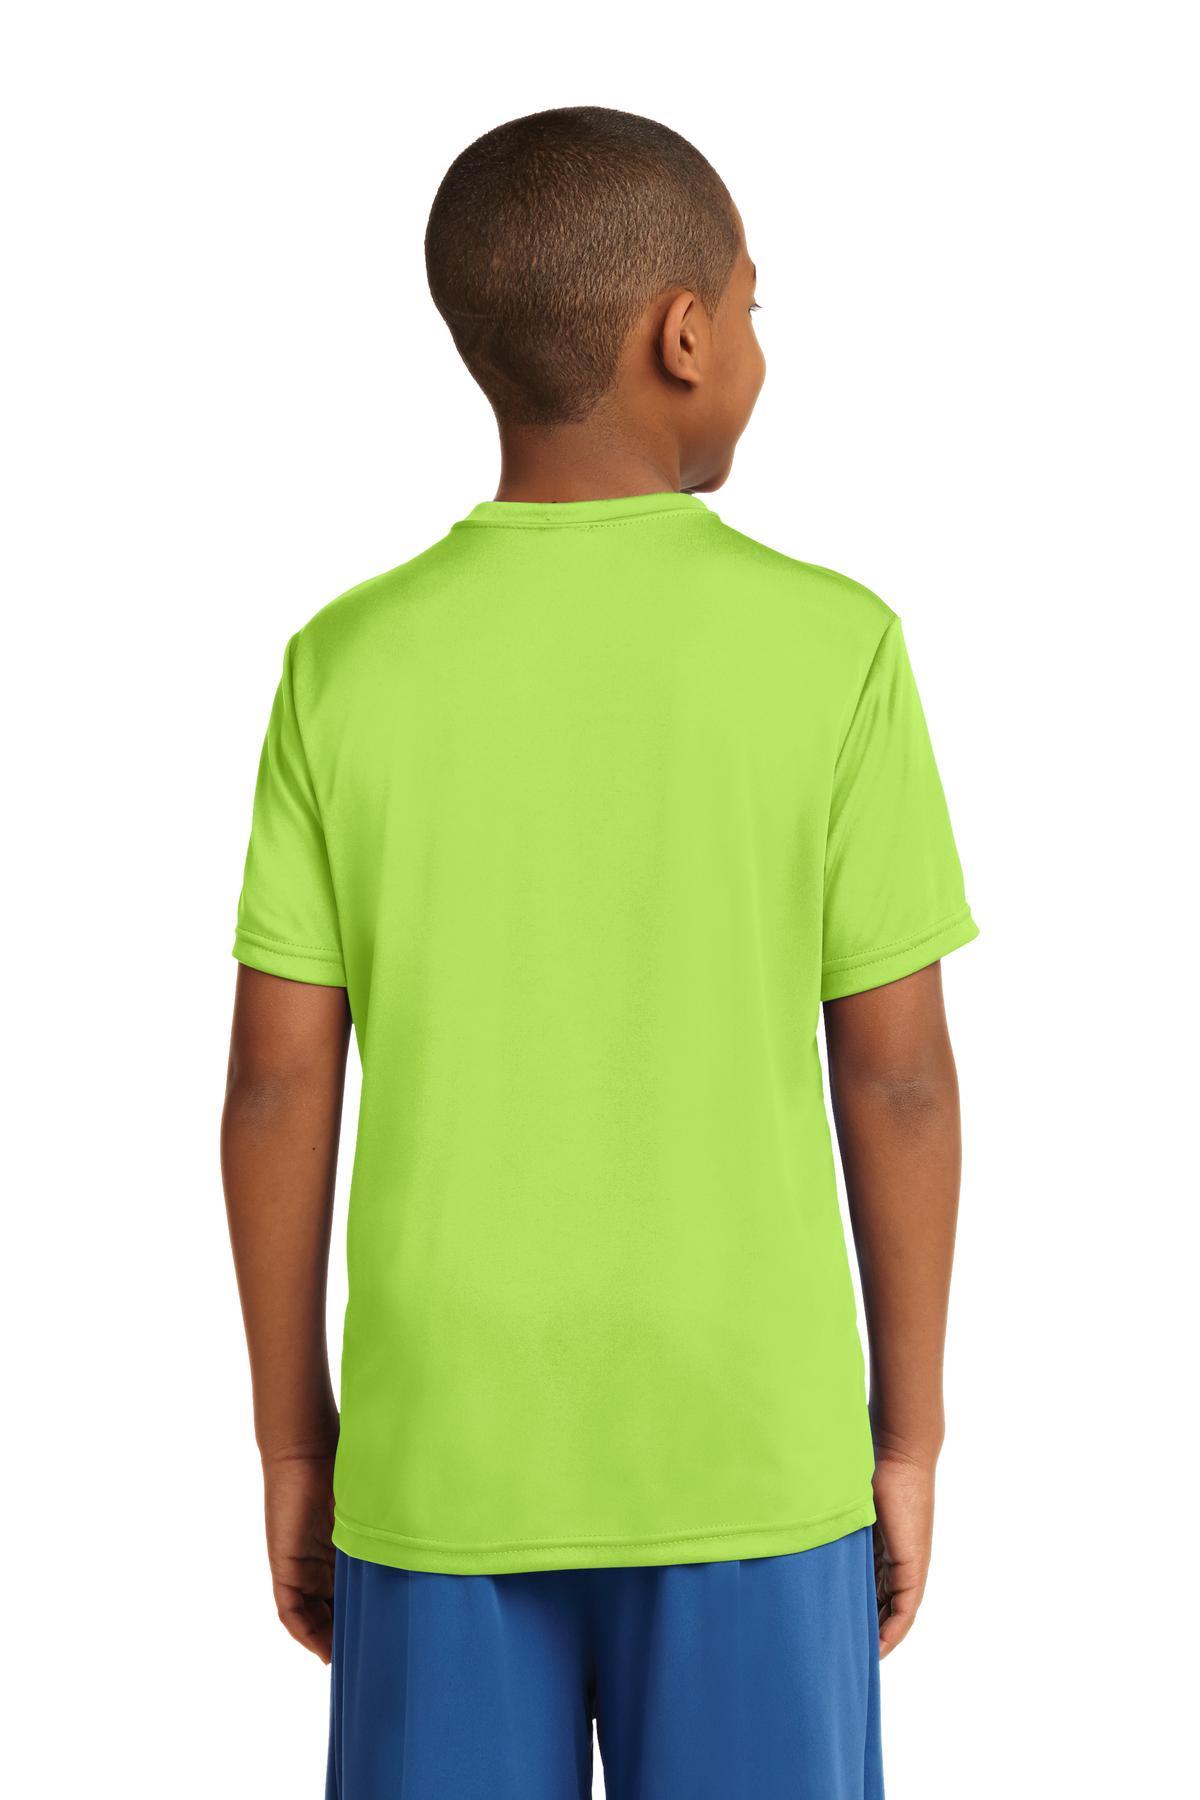 Sport-Tek® Youth PosiCharge® Competitor™ Tee. YST350 [Lime Shock] - DFW Impression